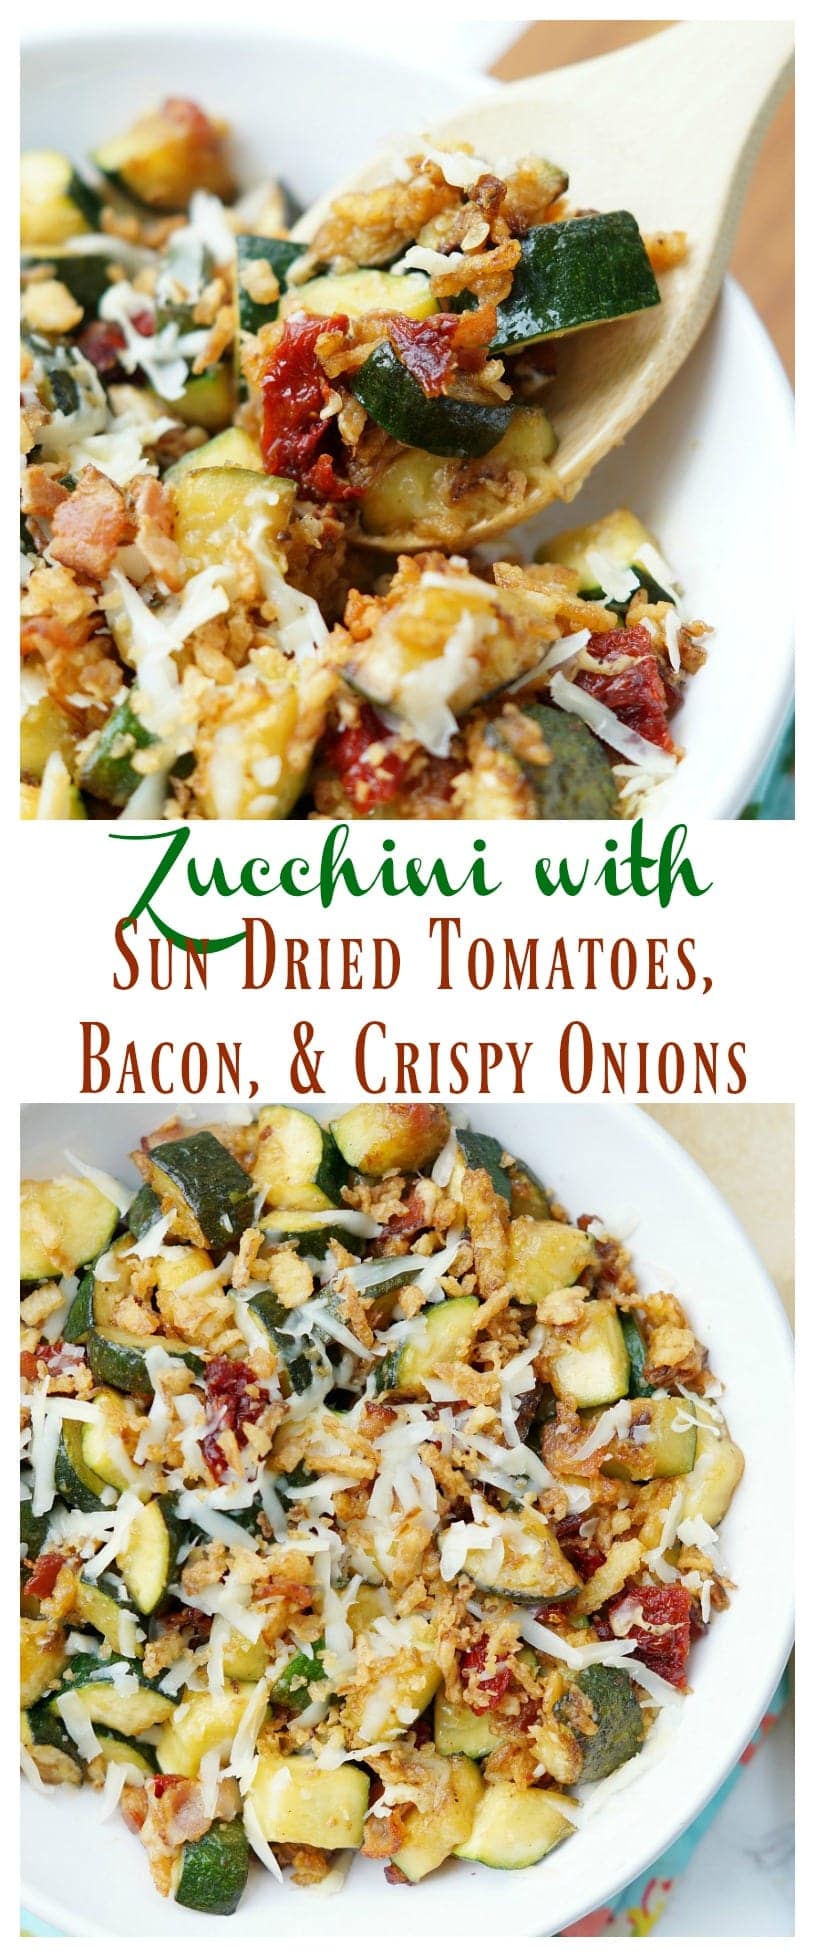 Zucchini with Sun Dried Tomatoes, Bacon, and Crispy Onions is a flavor packed side dish recipe that your family will ask for again and again this zucchini season!